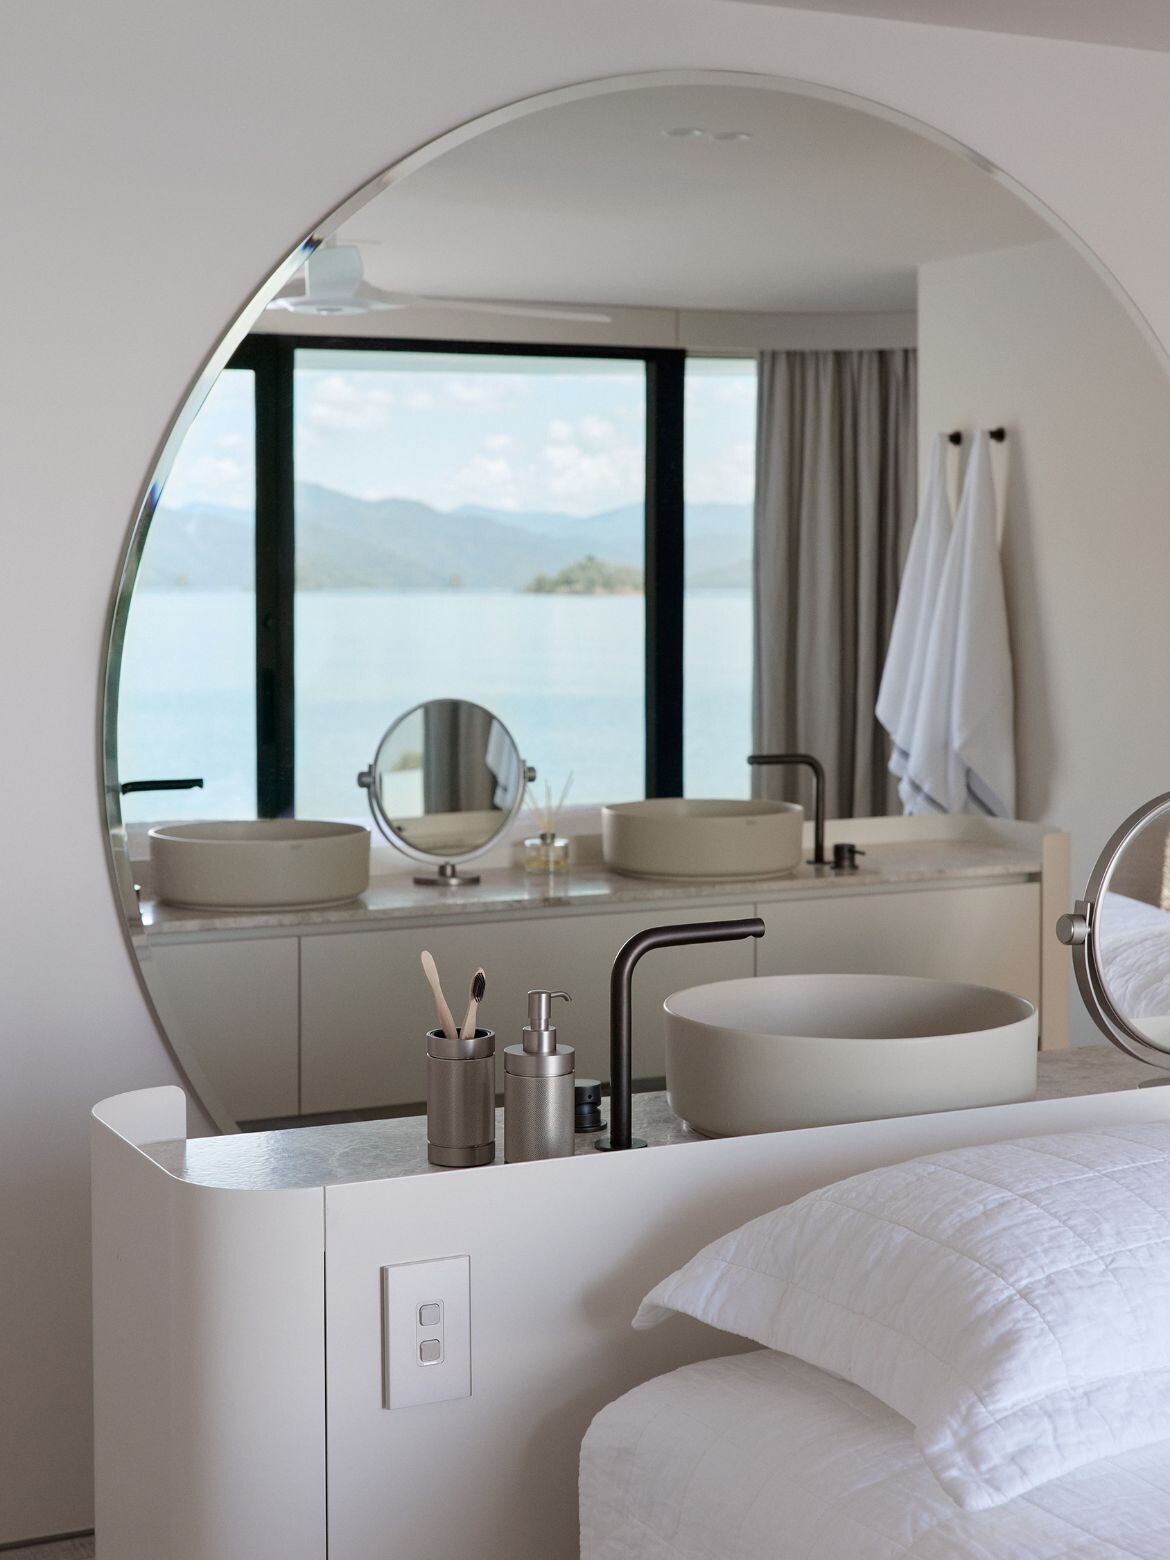 The bedroom suites on Halcyon are exceptionally appointed and luxurious